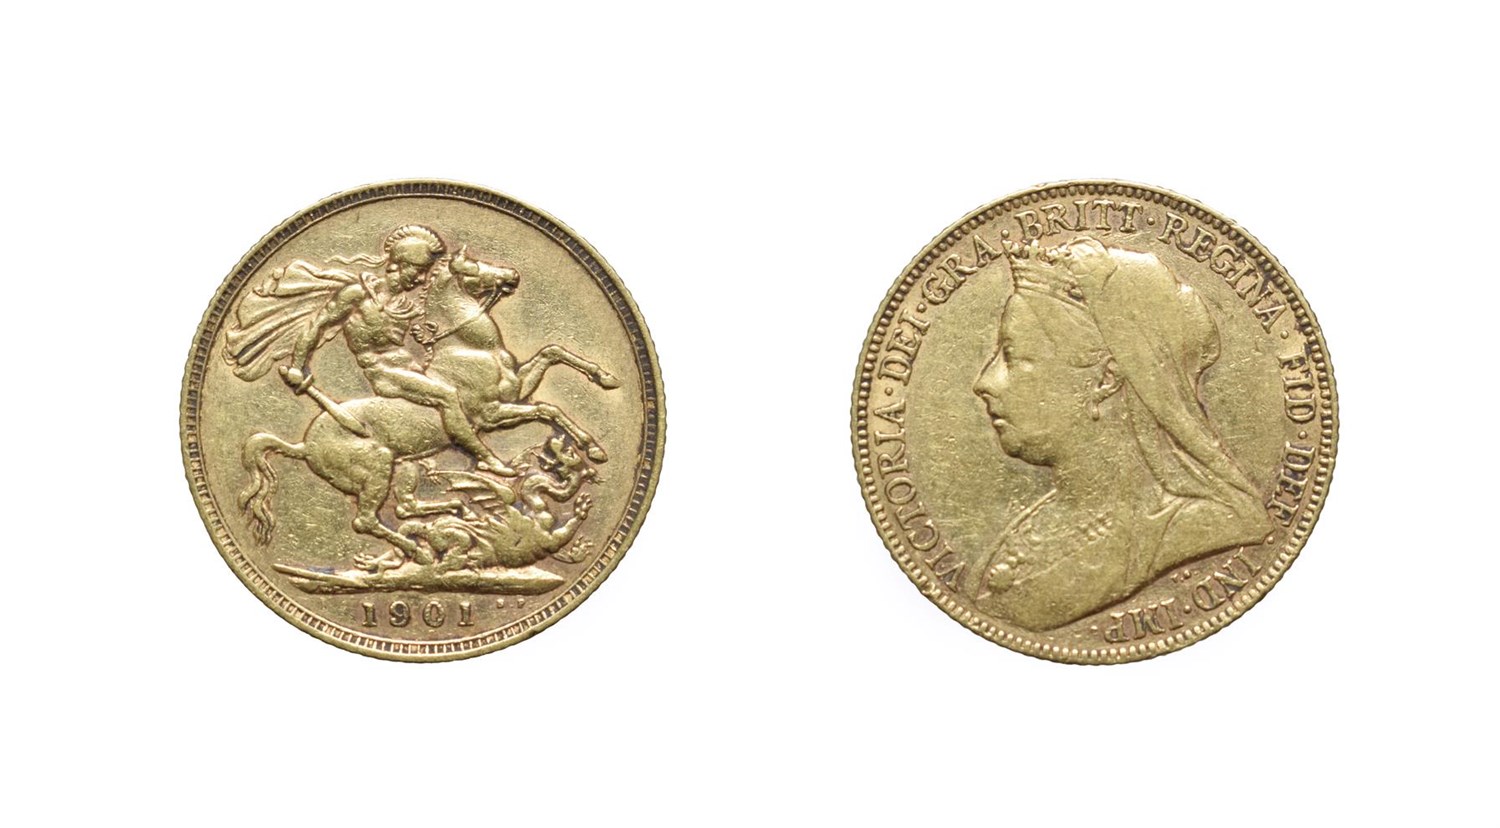 Lot 4156 - Victoria, 1901 Sovereign. Obv: Old head left. Rev: St. George and the dragon, 1901 in exergue....